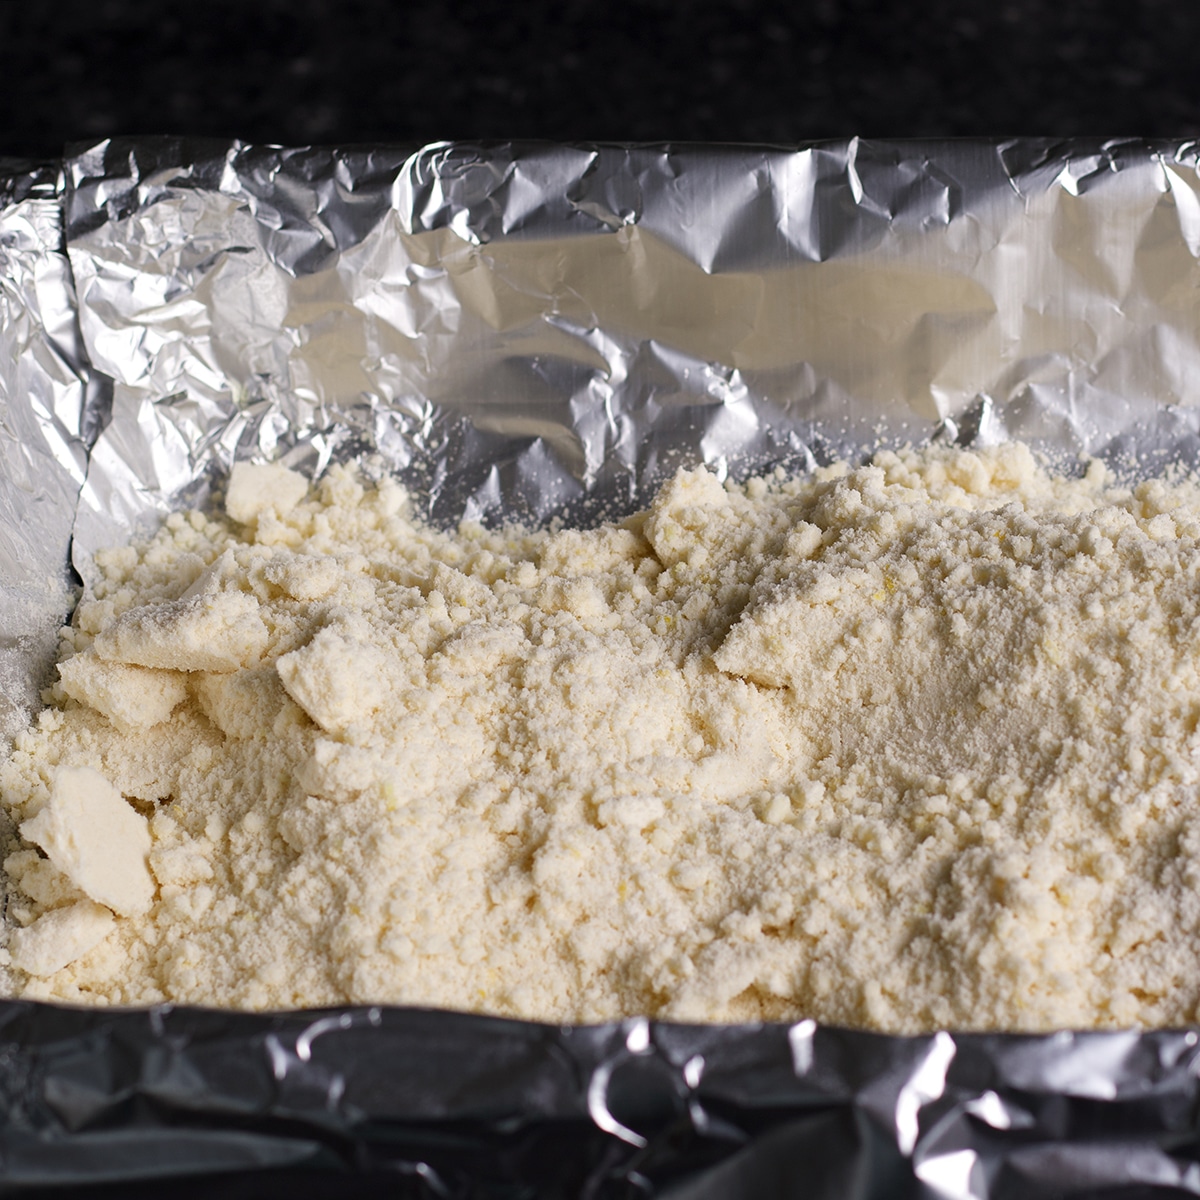 Adding the crumbly raw shortbread dough to a pan that's been lined with aluminum foil.